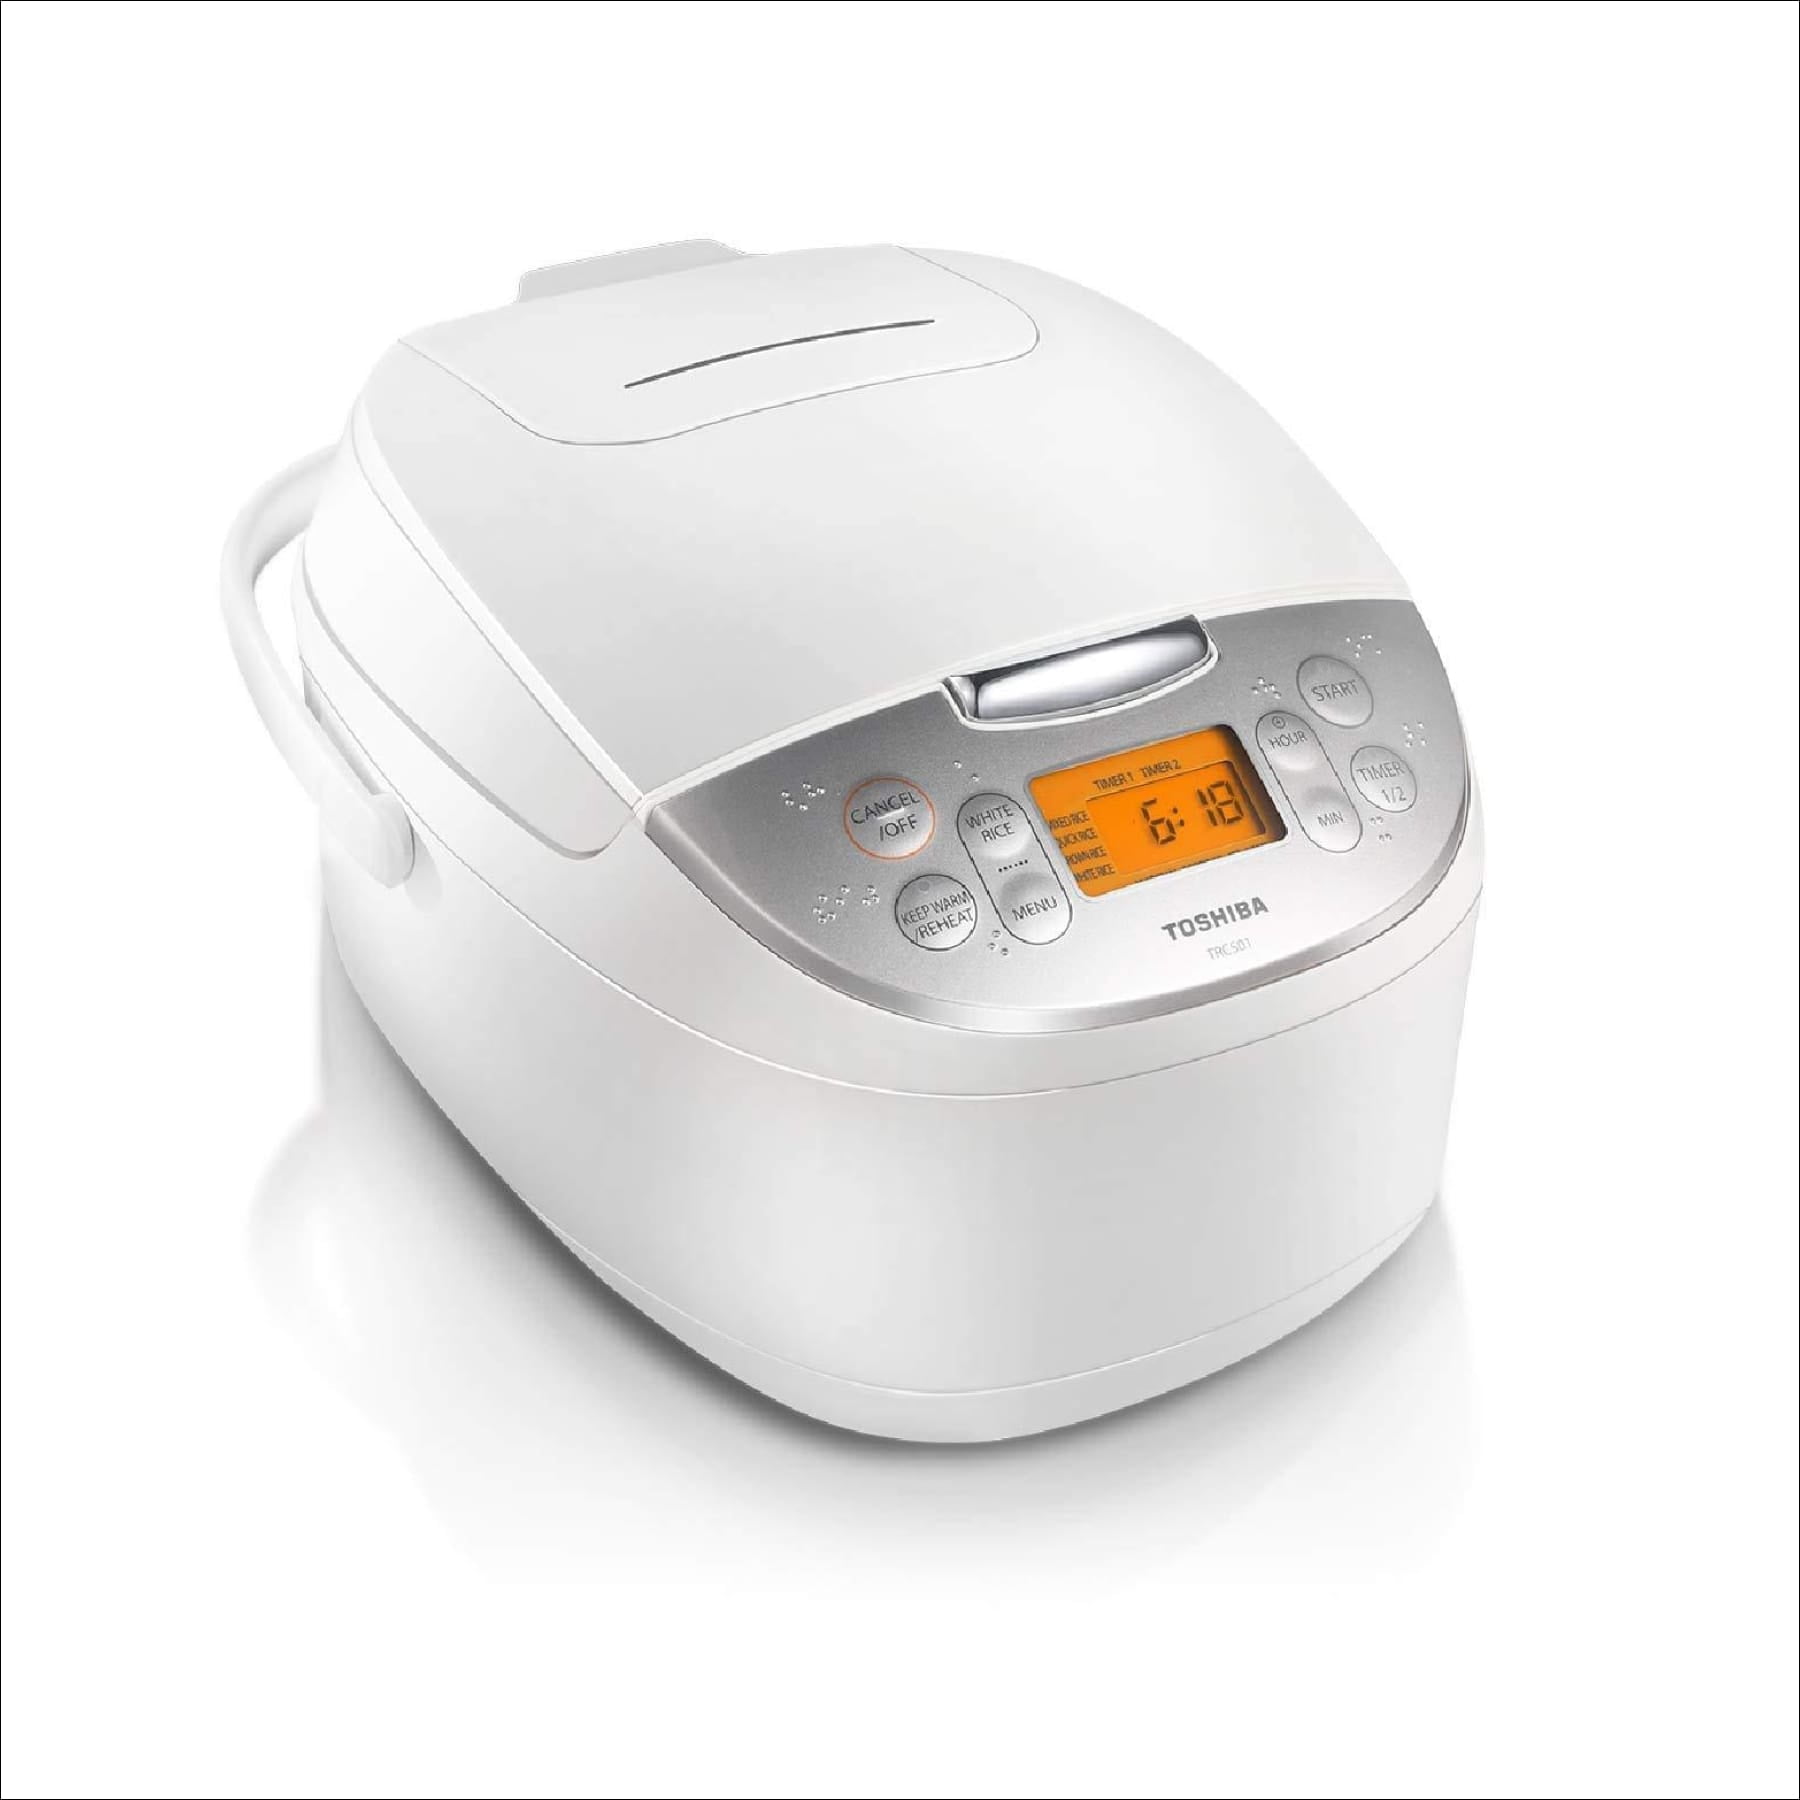 Details about   Cuckoo CR-0632F Electric Rice Cooker 6 Cup Programmable Multifunctional New 